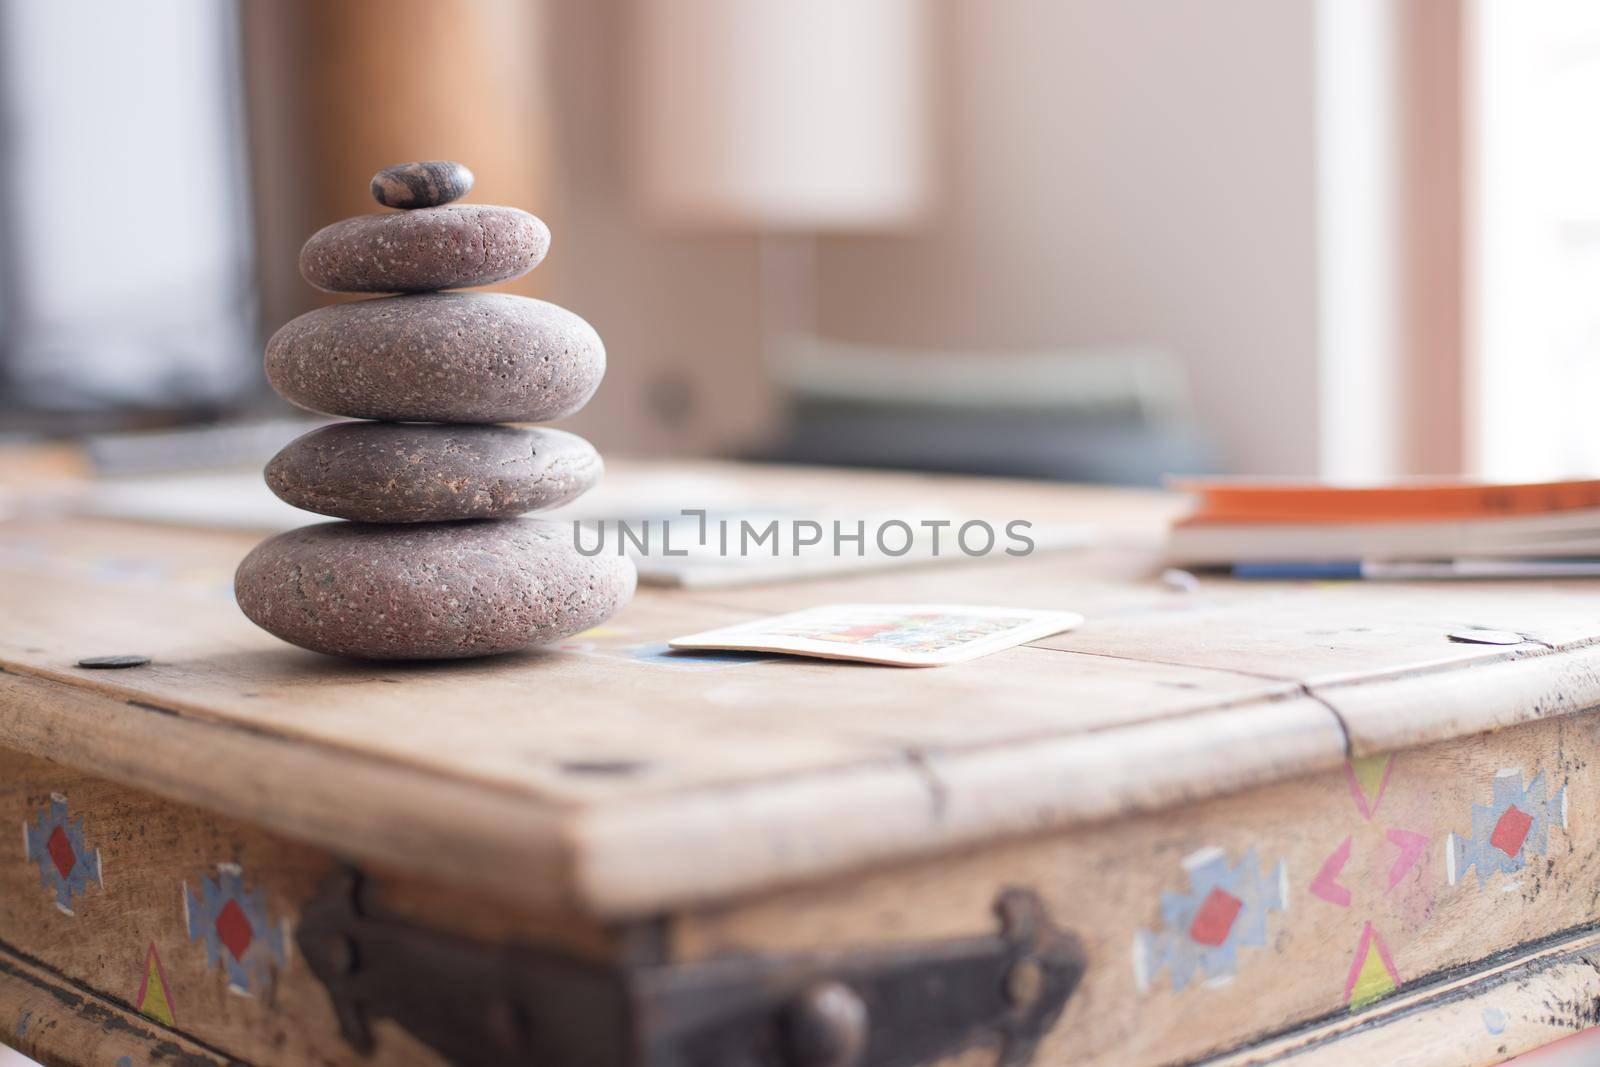 Feng Shui: Stone cairn in the foreground, blurry living room in the background. Balance and relaxation.